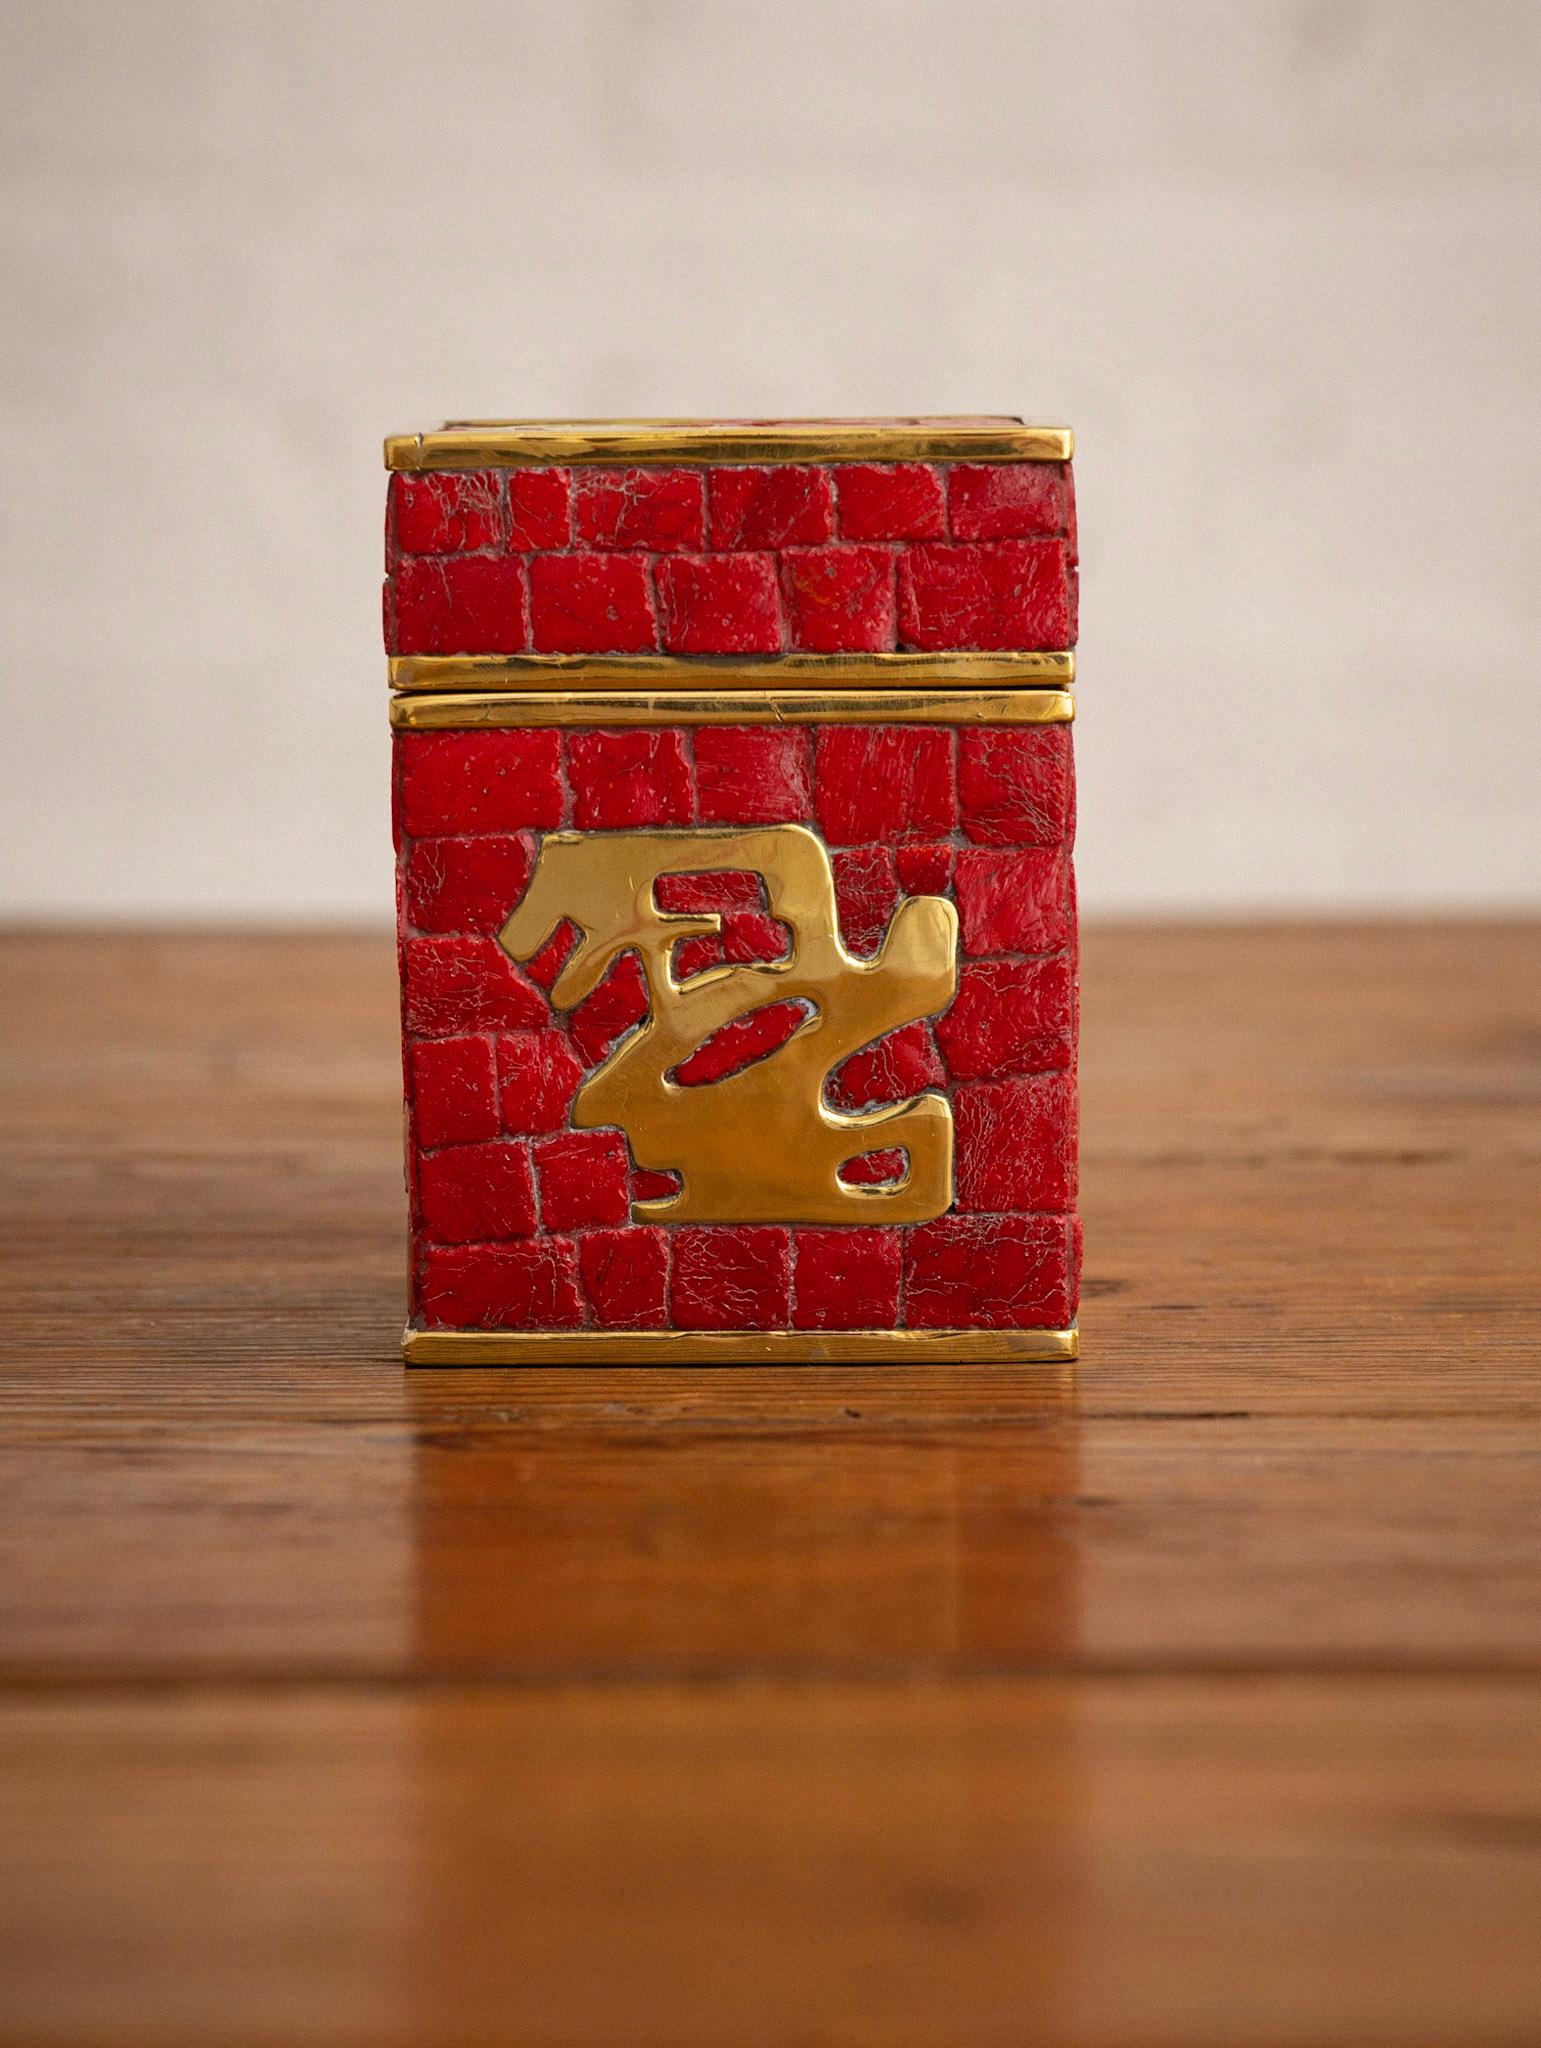 Handwrought Midcentury Mexican Mosaic and Brass Lidded Box by Salvador Teran In Good Condition For Sale In Brooklyn, NY